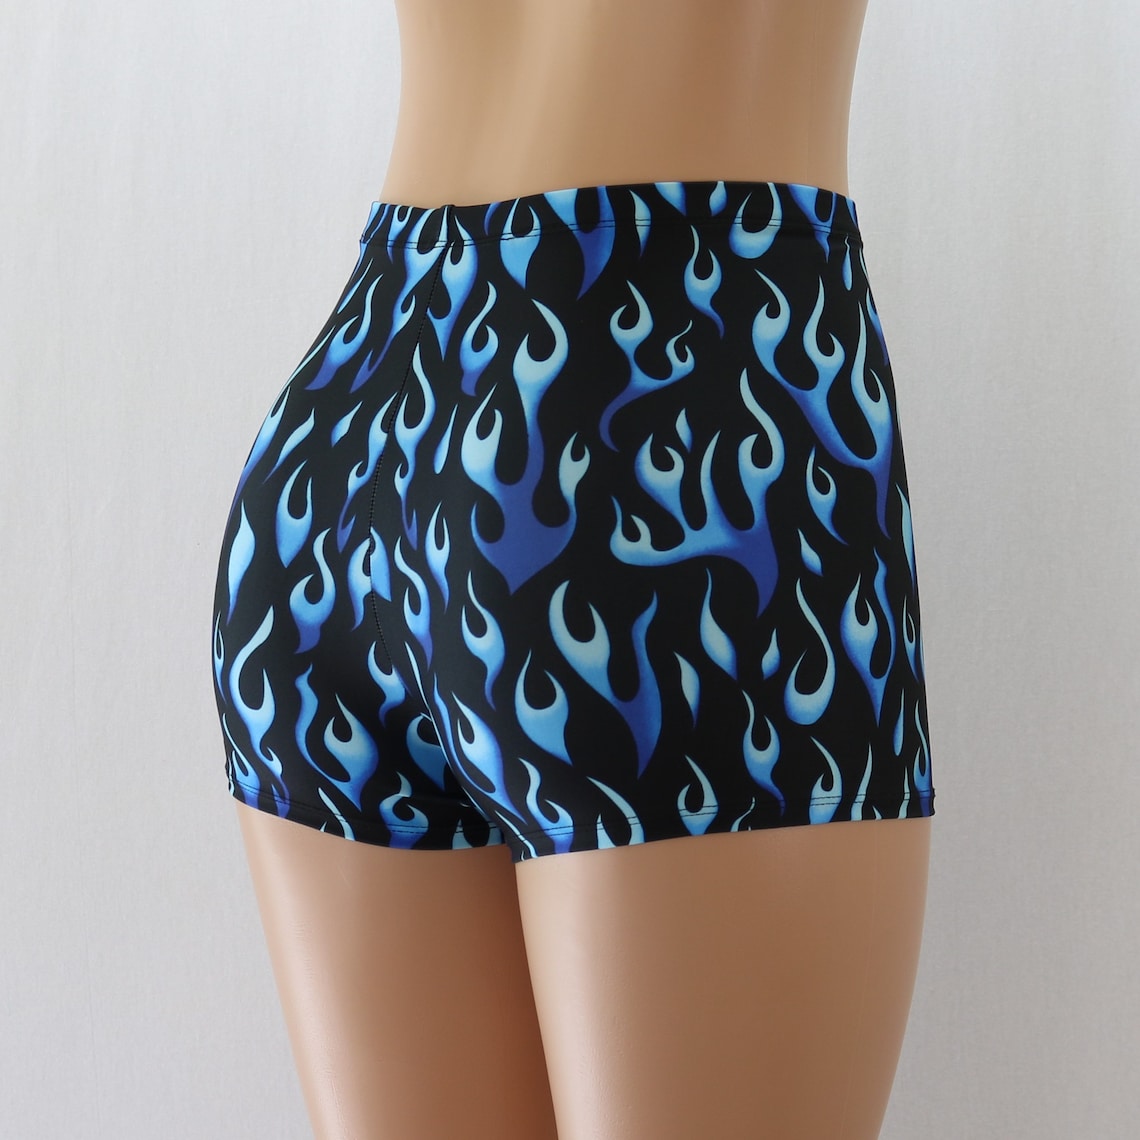 Blue Orange or Silver Fire Flames High Waist Booty Shorts. | Etsy